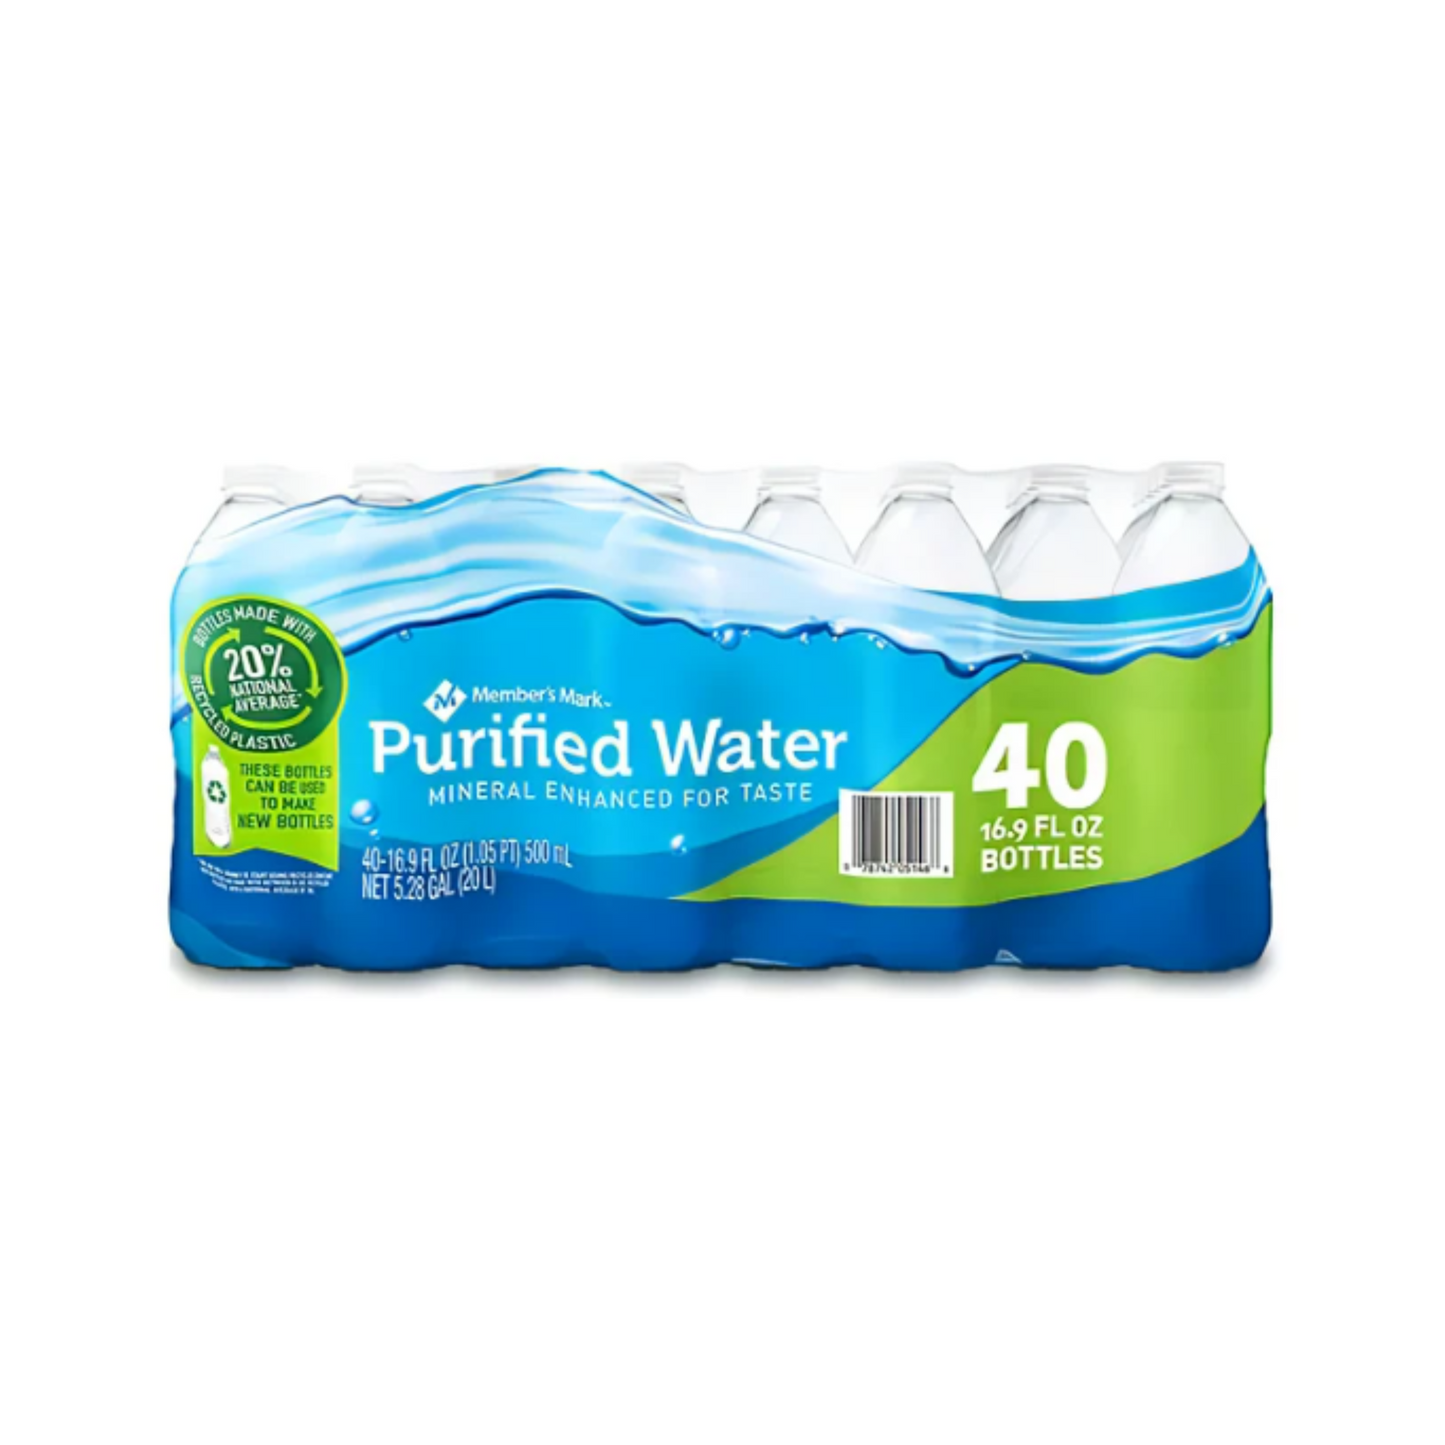 Stay hydrated with our 40-pack of purified 16.9 oz water bottles